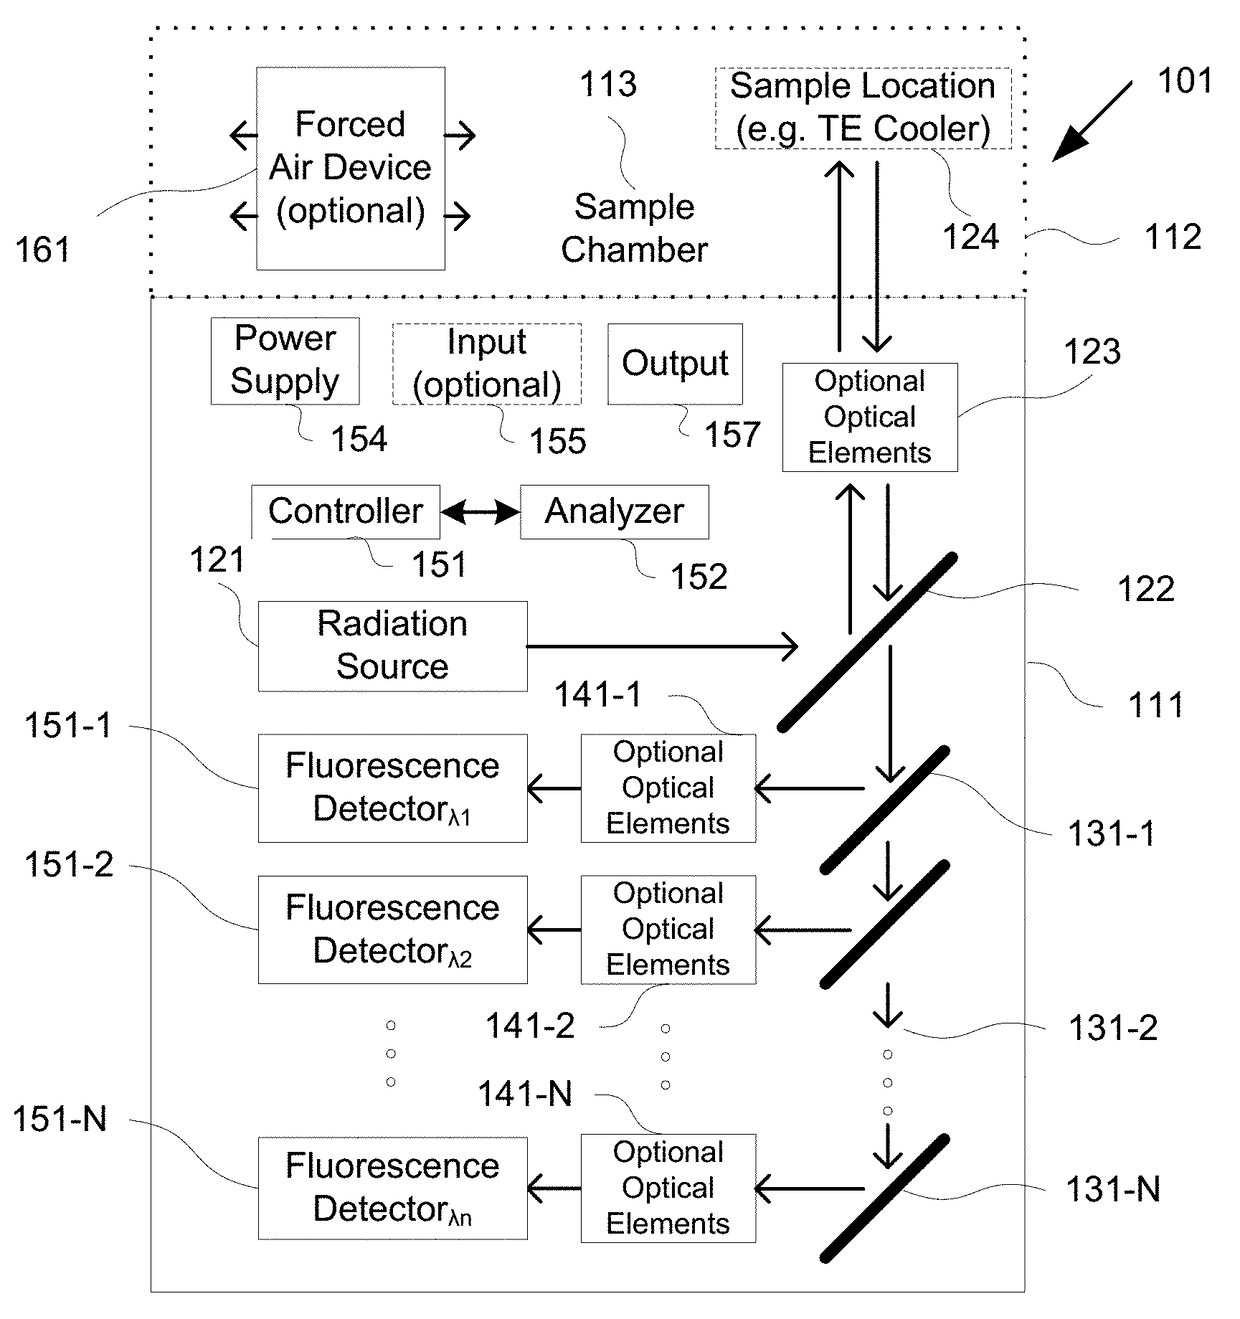 Native fluorescence detection methods, devices, and systems for organic compounds